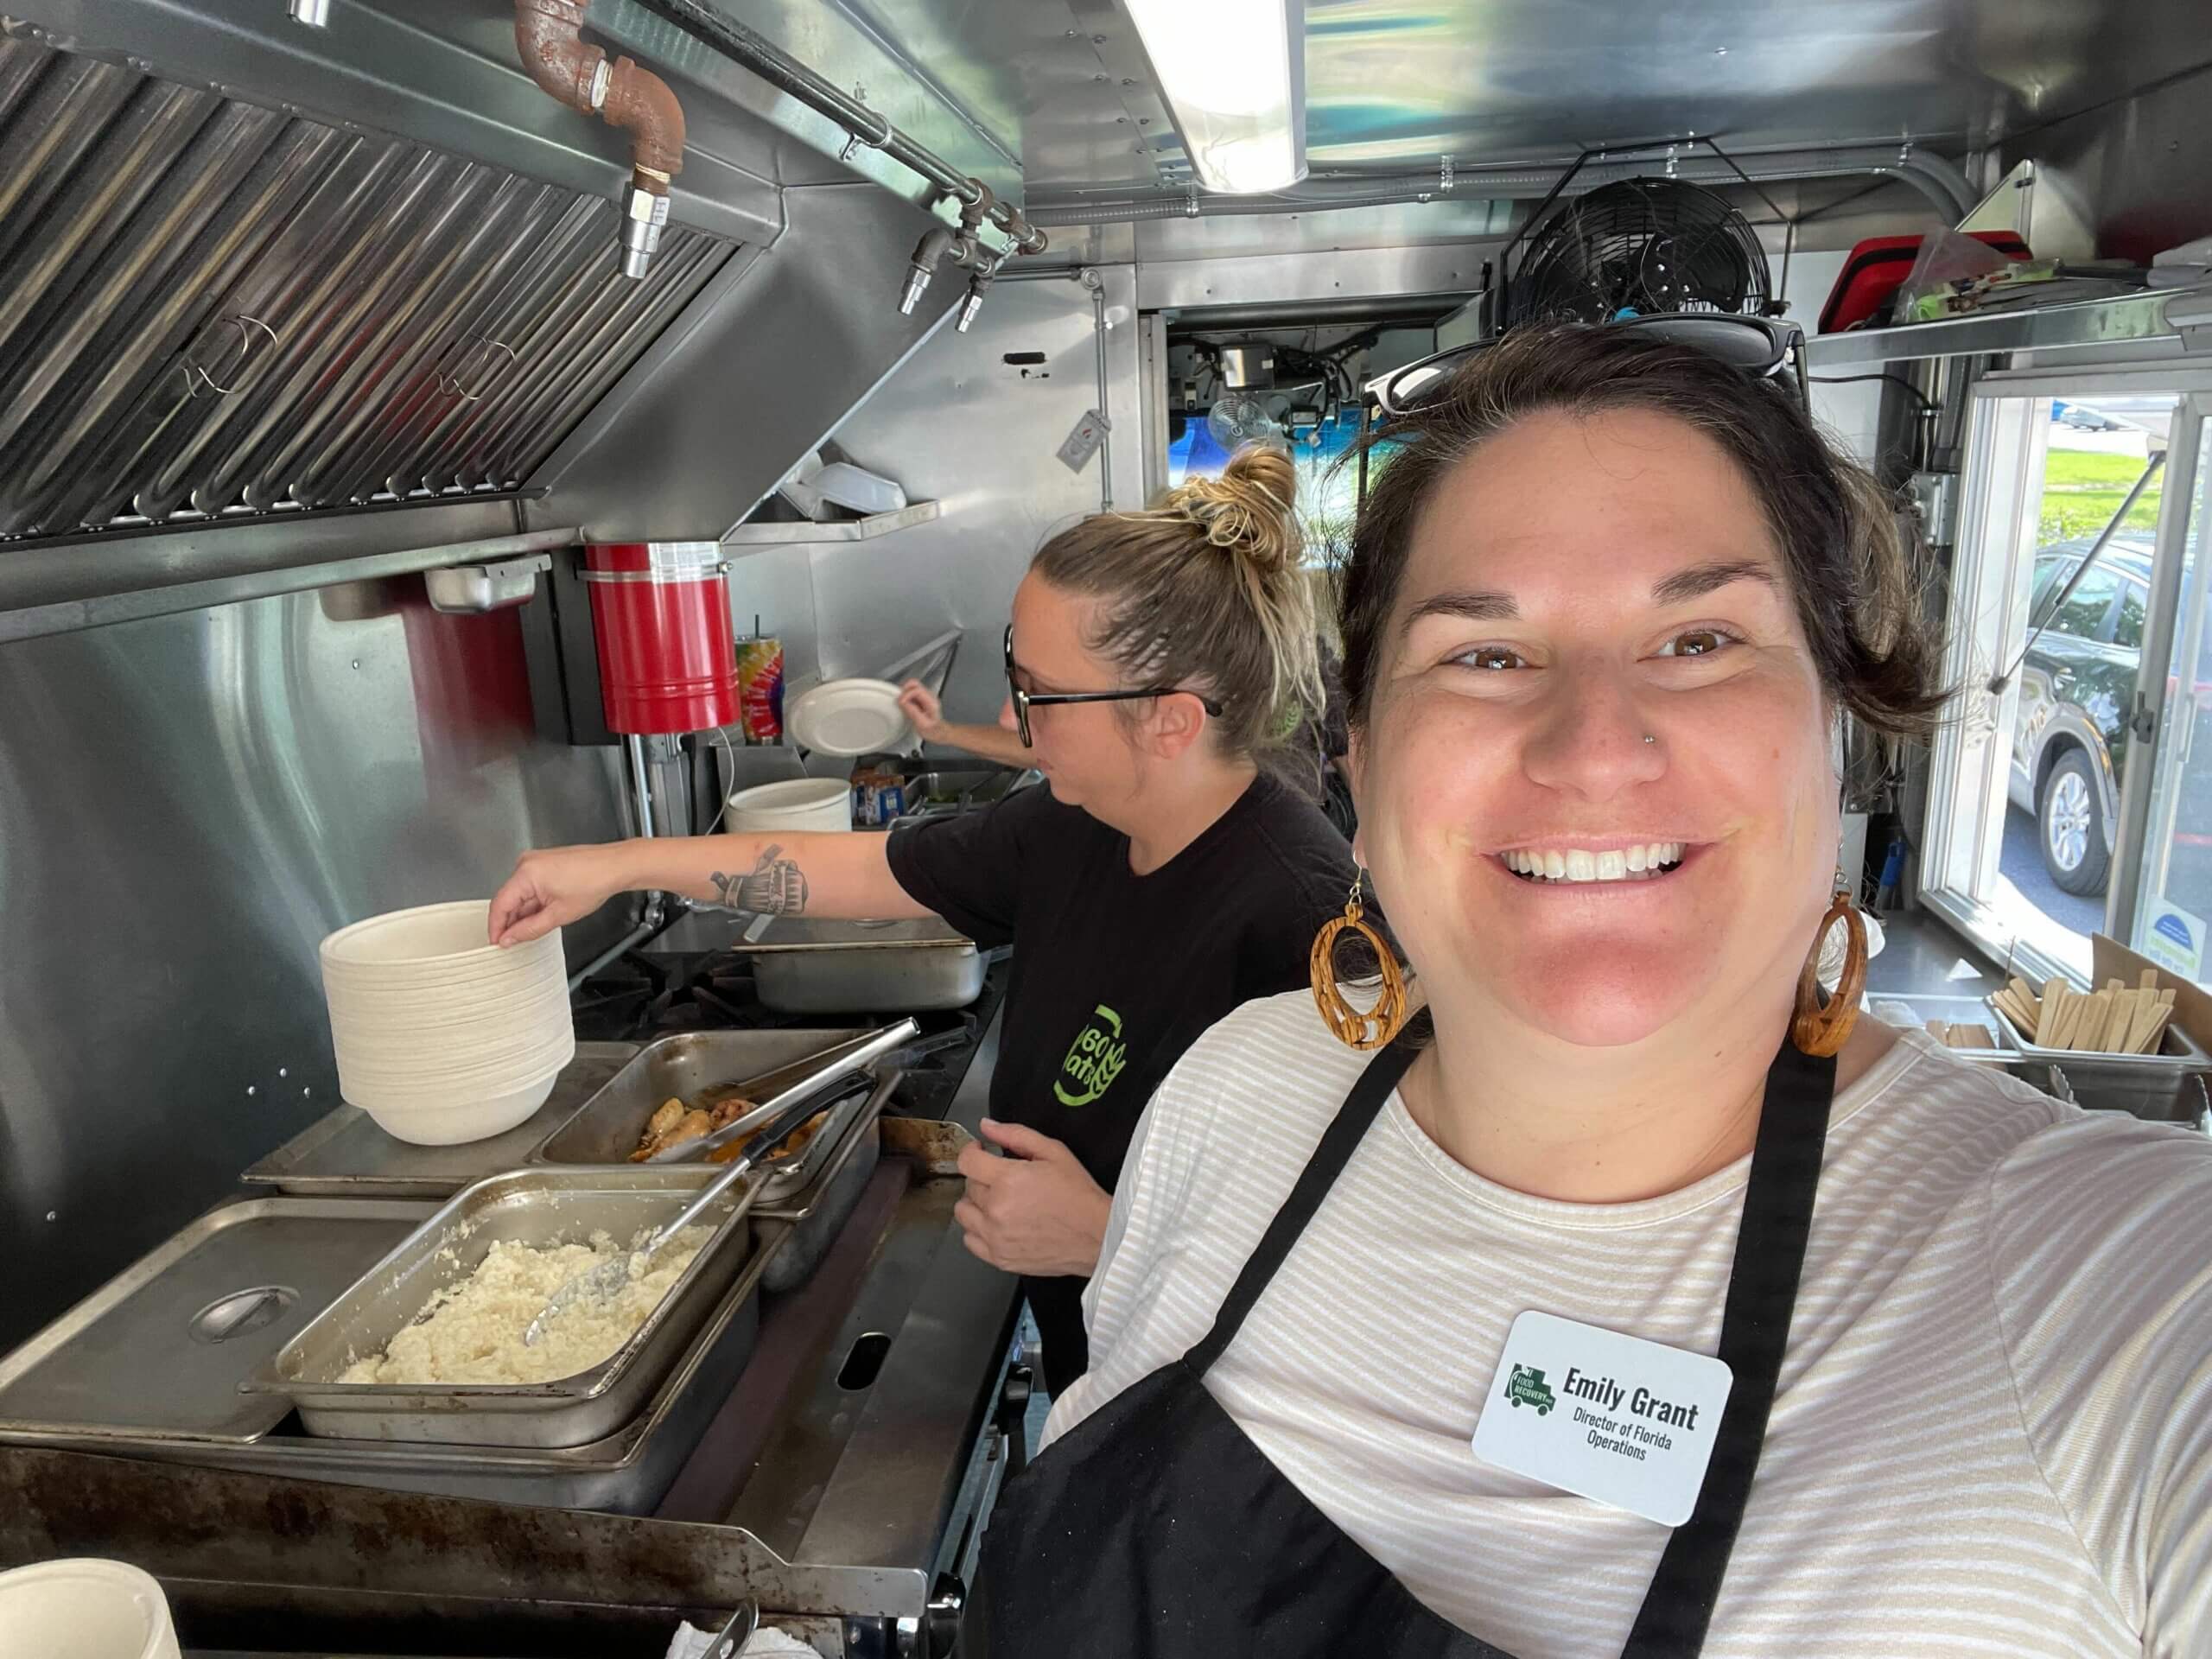 Here I am volunteering with 360 Eats in Clearwater, who use recovered food to make 